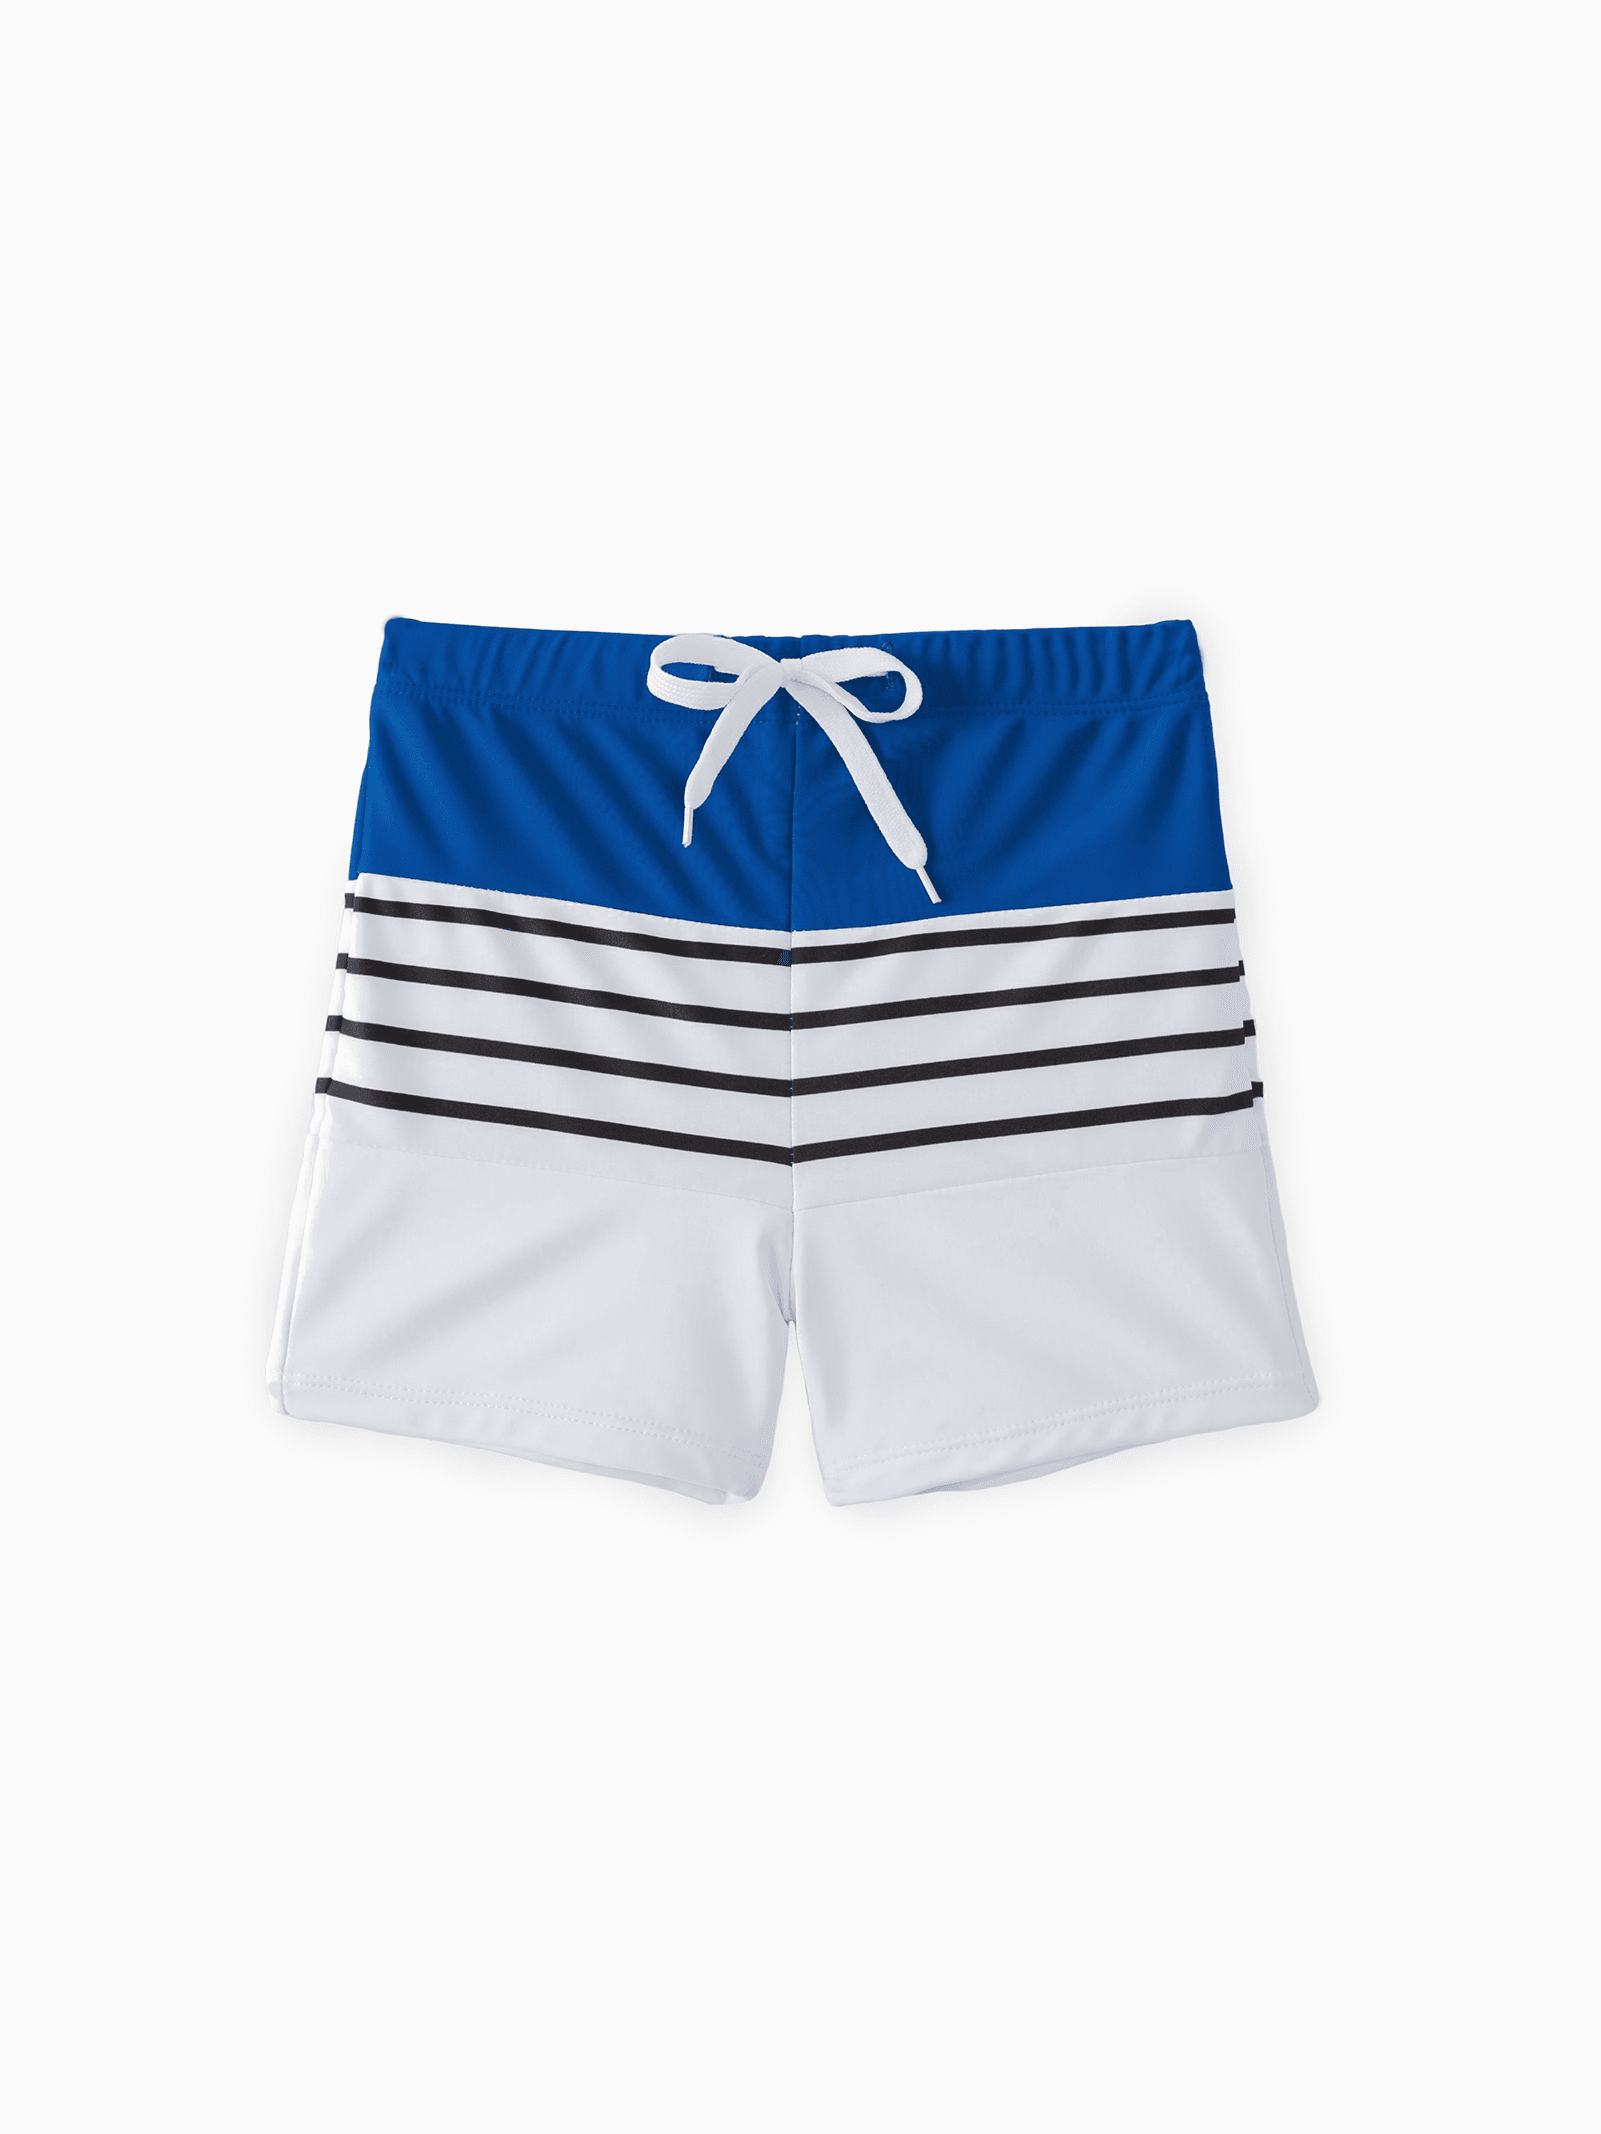 

Matching Family Swimsuit Colorblock Drawstring Swim Trunks or Striped Blue Spliced Tankini with Cross-Front, Tie-Back, and Thin Straps